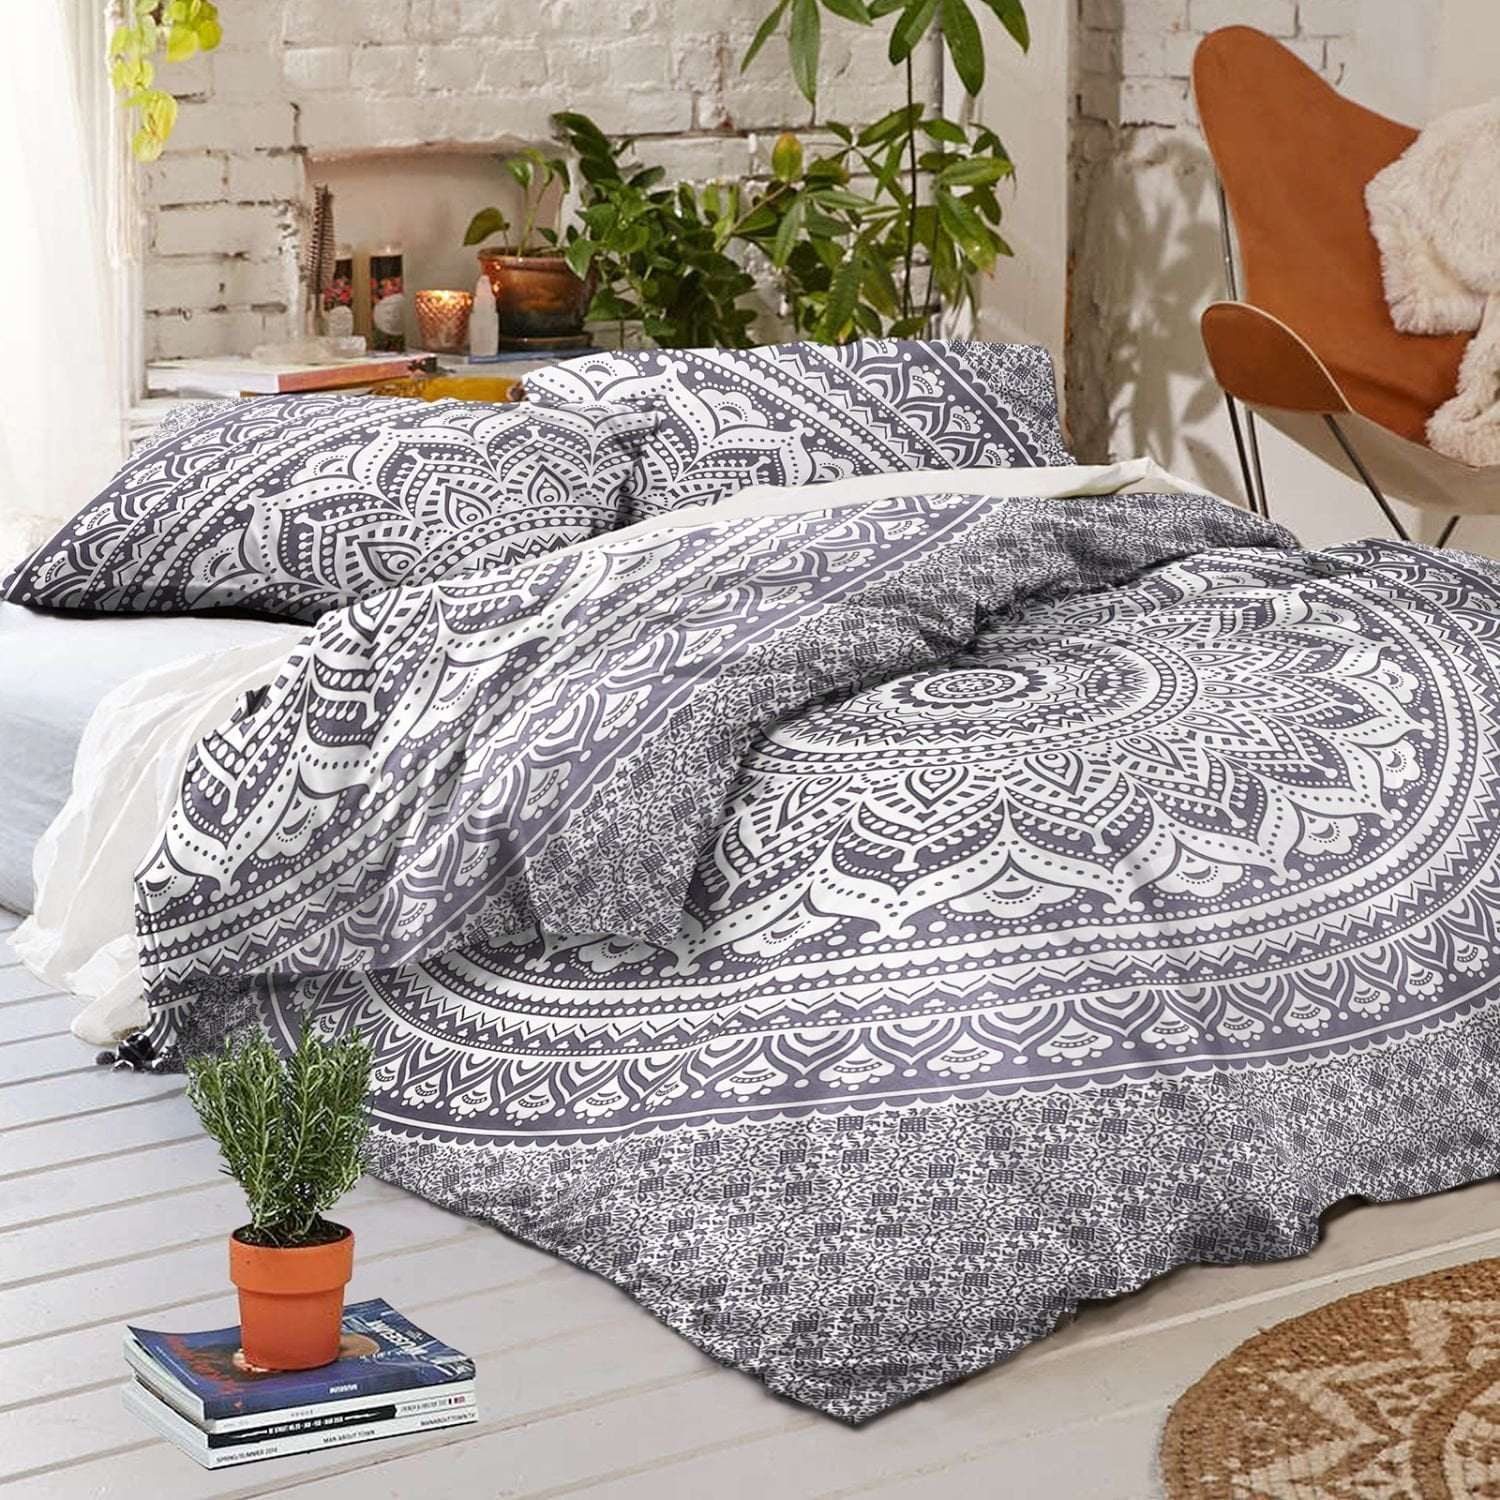 Indian Bohemian Star Mandala Bedding Twin Size Bedspreads Vintage Art Bed Cover 